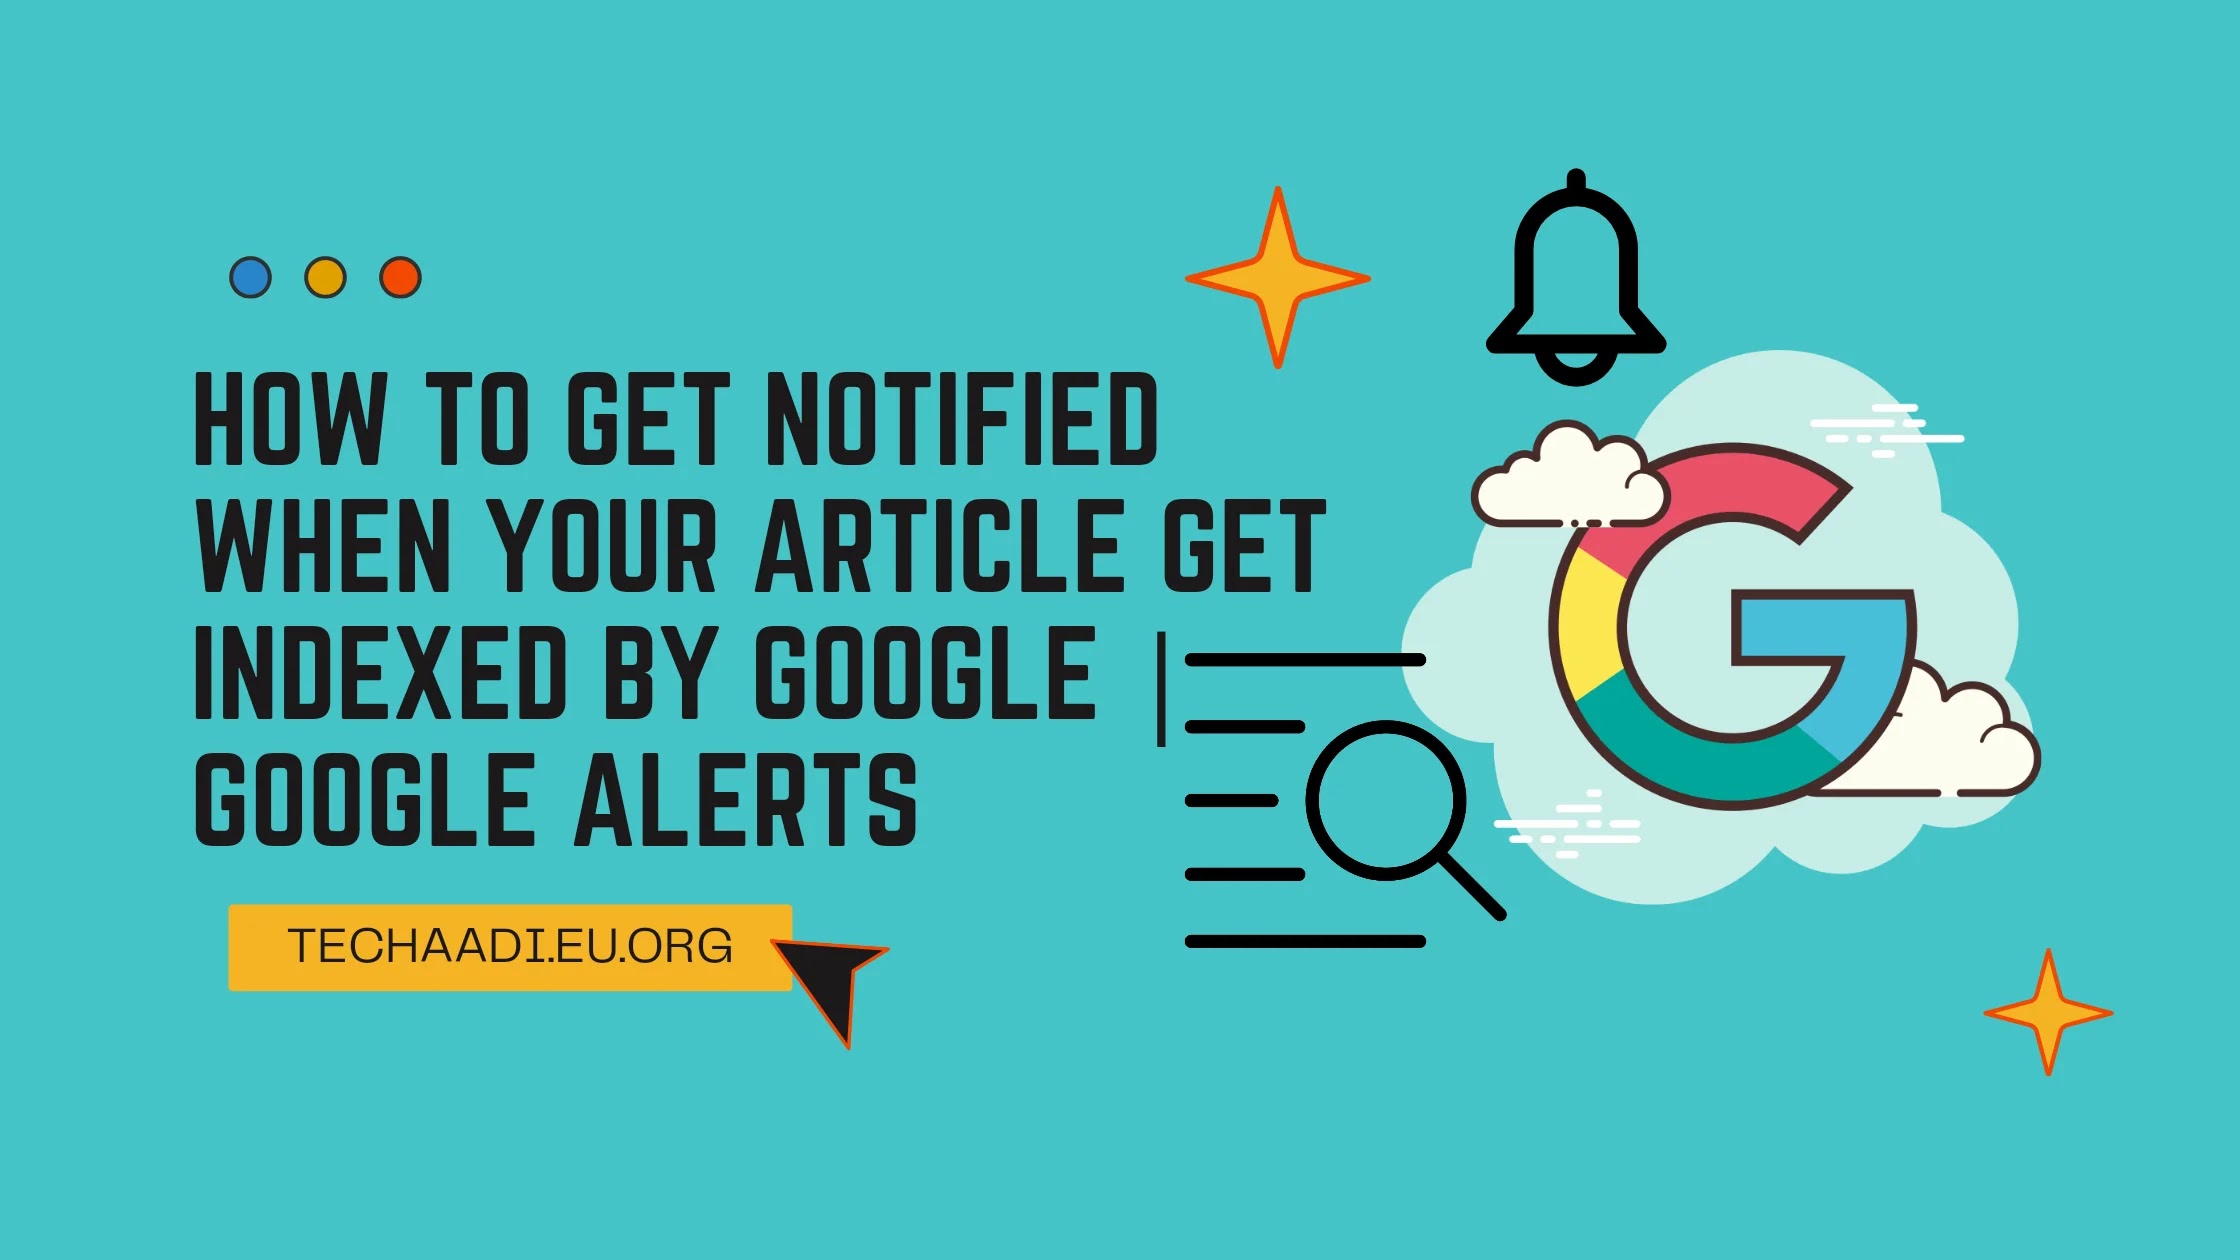 How to Get Notified When Your Article get Indexed by Google | Google Alerts